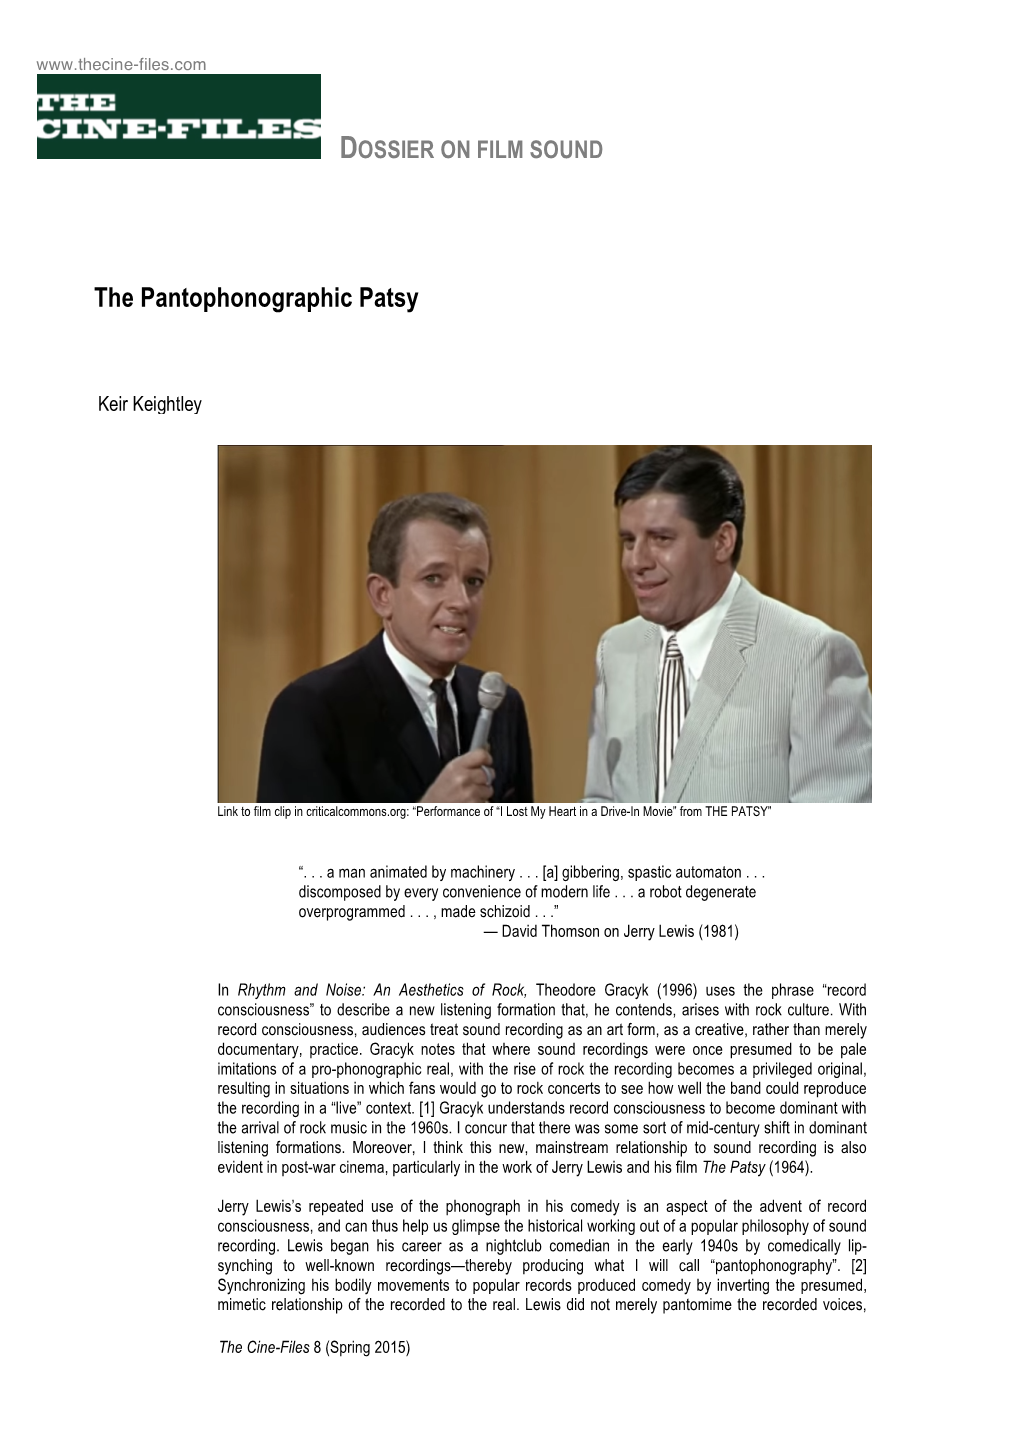 The Pantophonographic Patsy